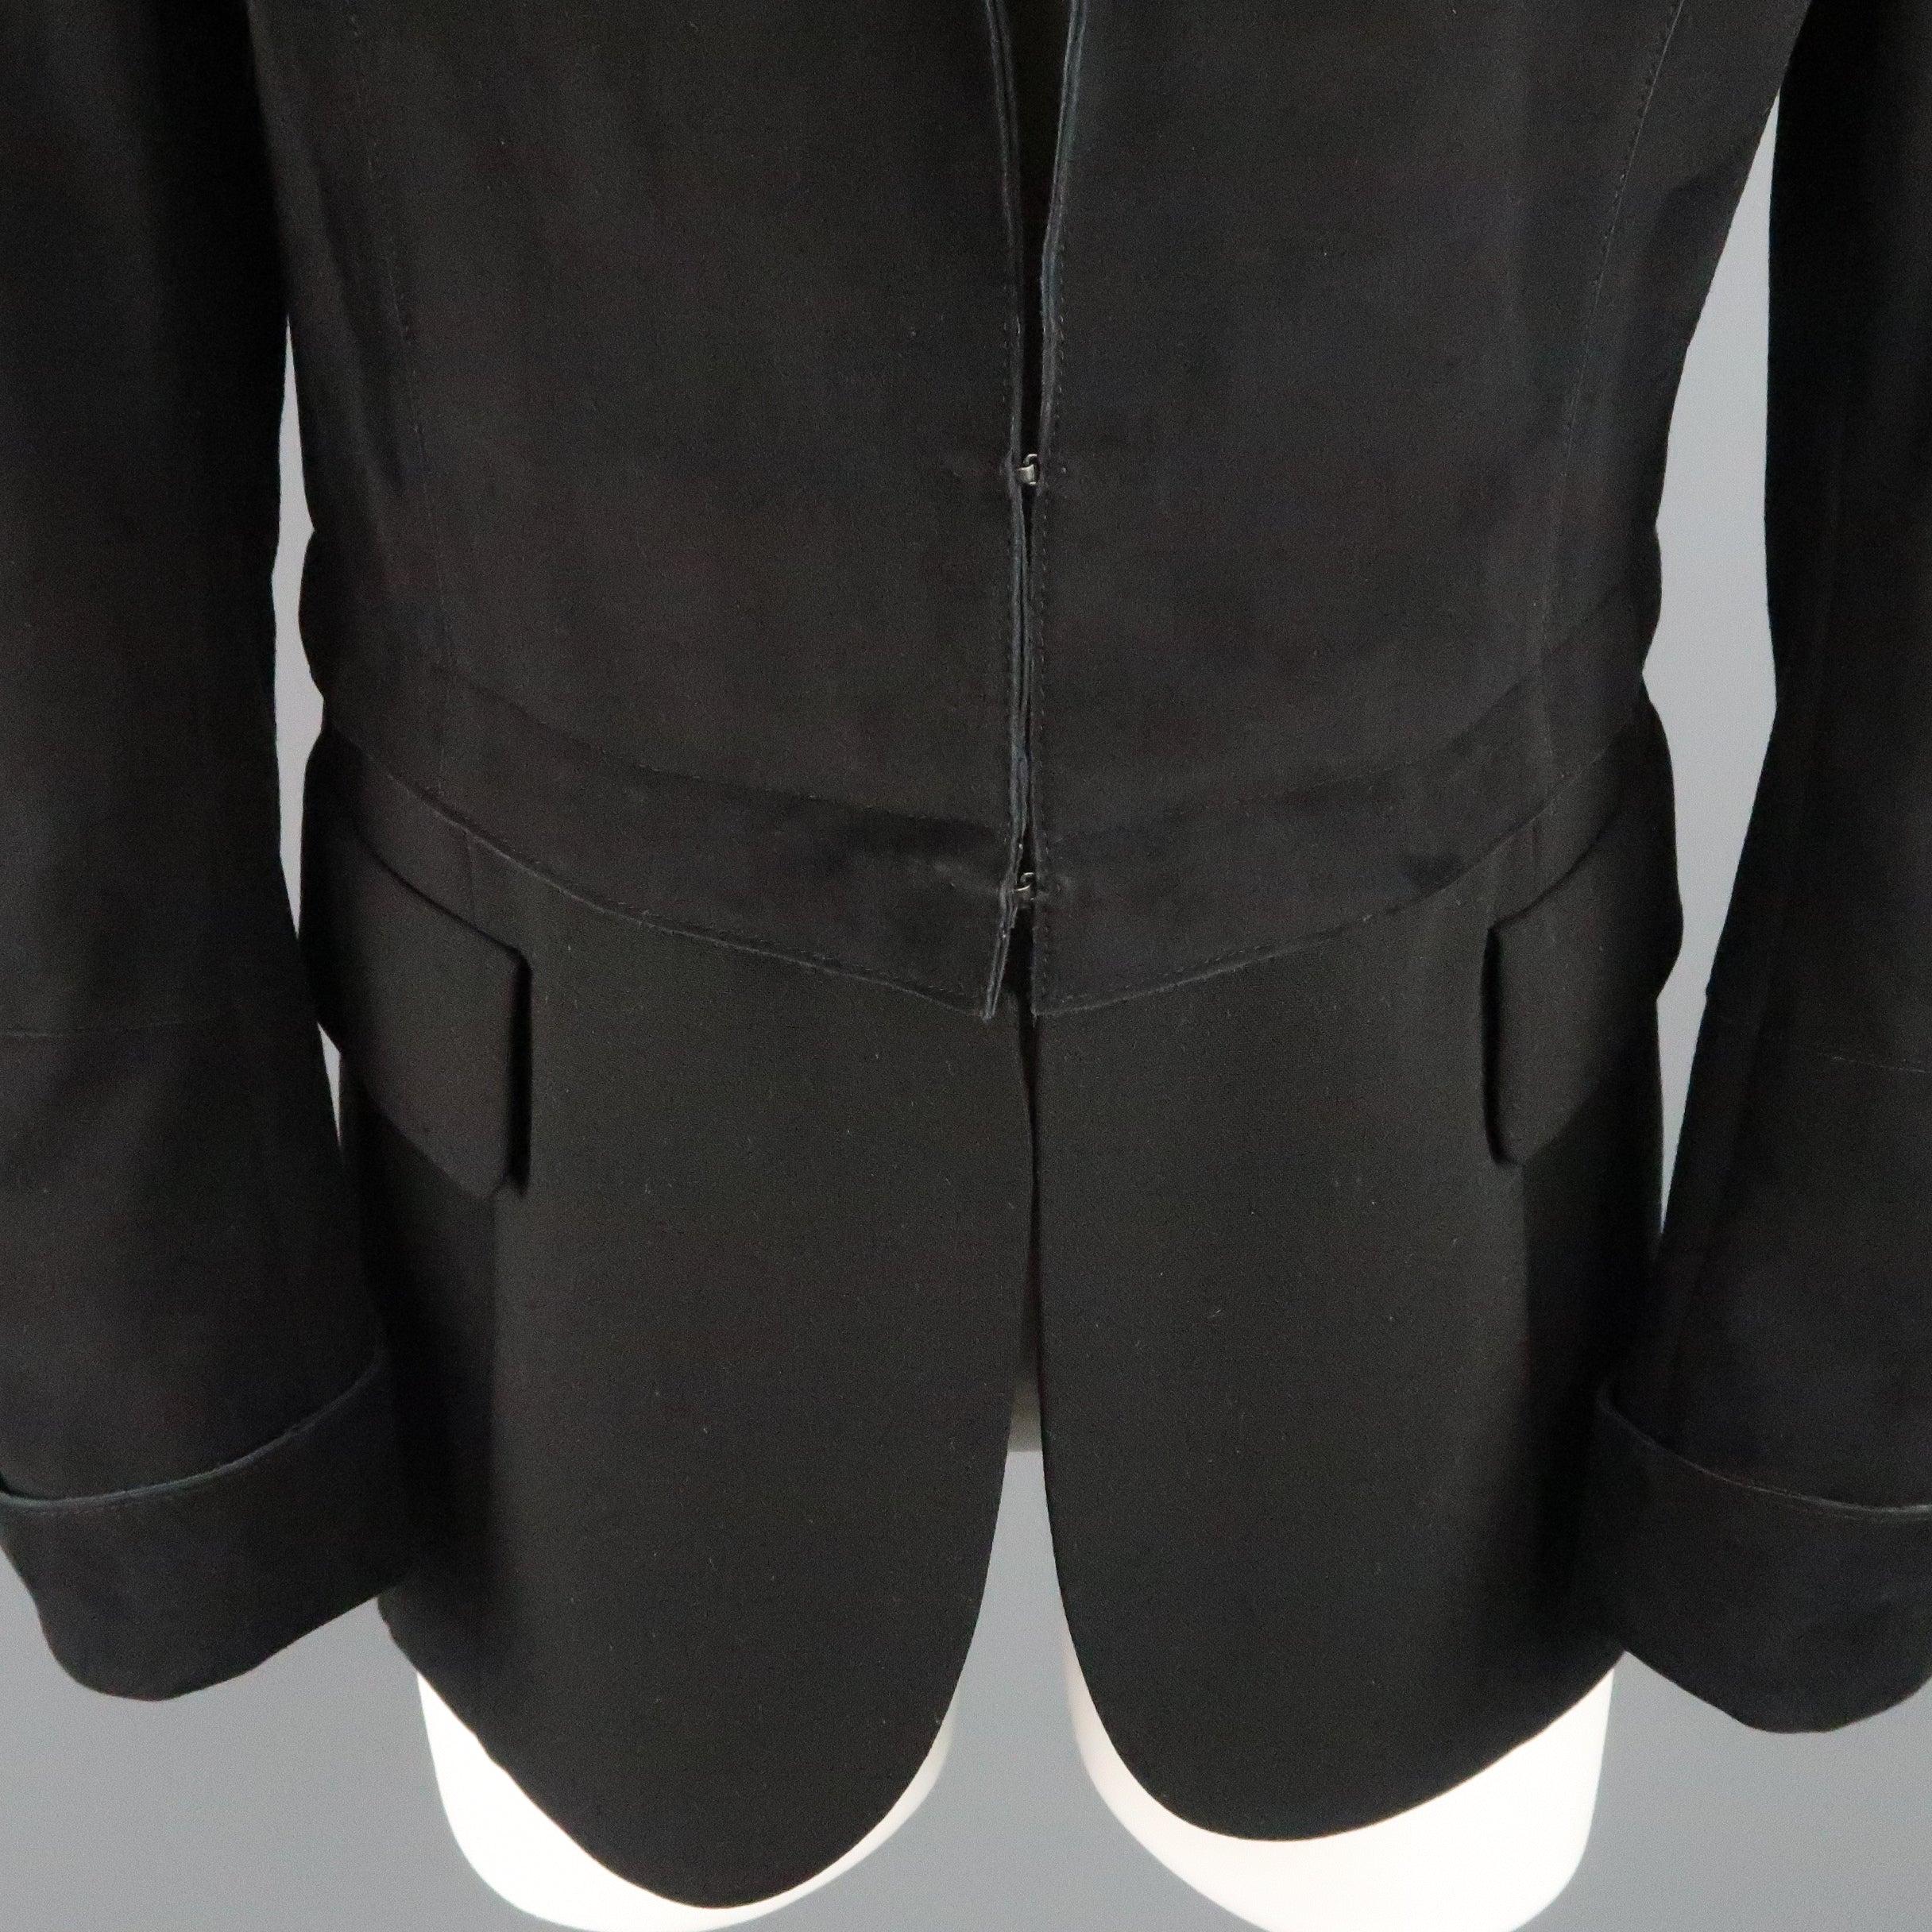 AKRIS blazer comes in black suede and features a classic notch lapel, double hook eye closure, and detachable zip off wool panel with faux flap pockets. 
 Excellent Pre-Owned Condition.
  
 

 Marked:  US 10
  
 

 Measurements: 
  
 l Shoulder: 15